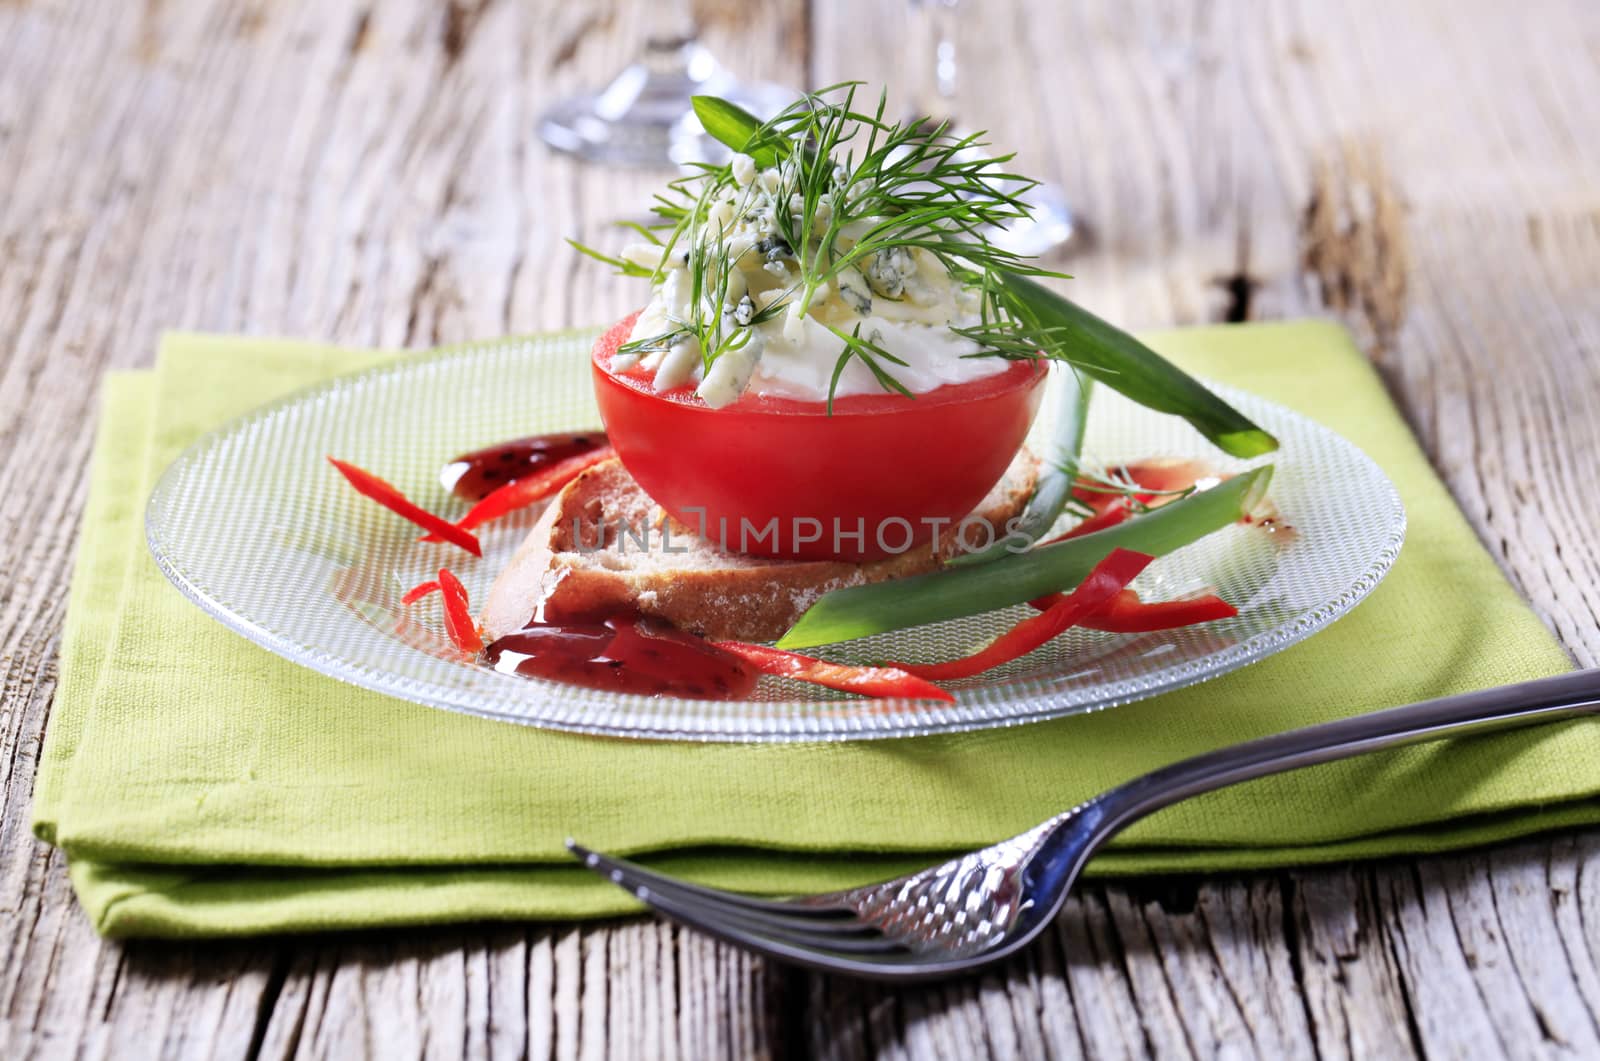 Cheese stuffed tomato on a slice of bread